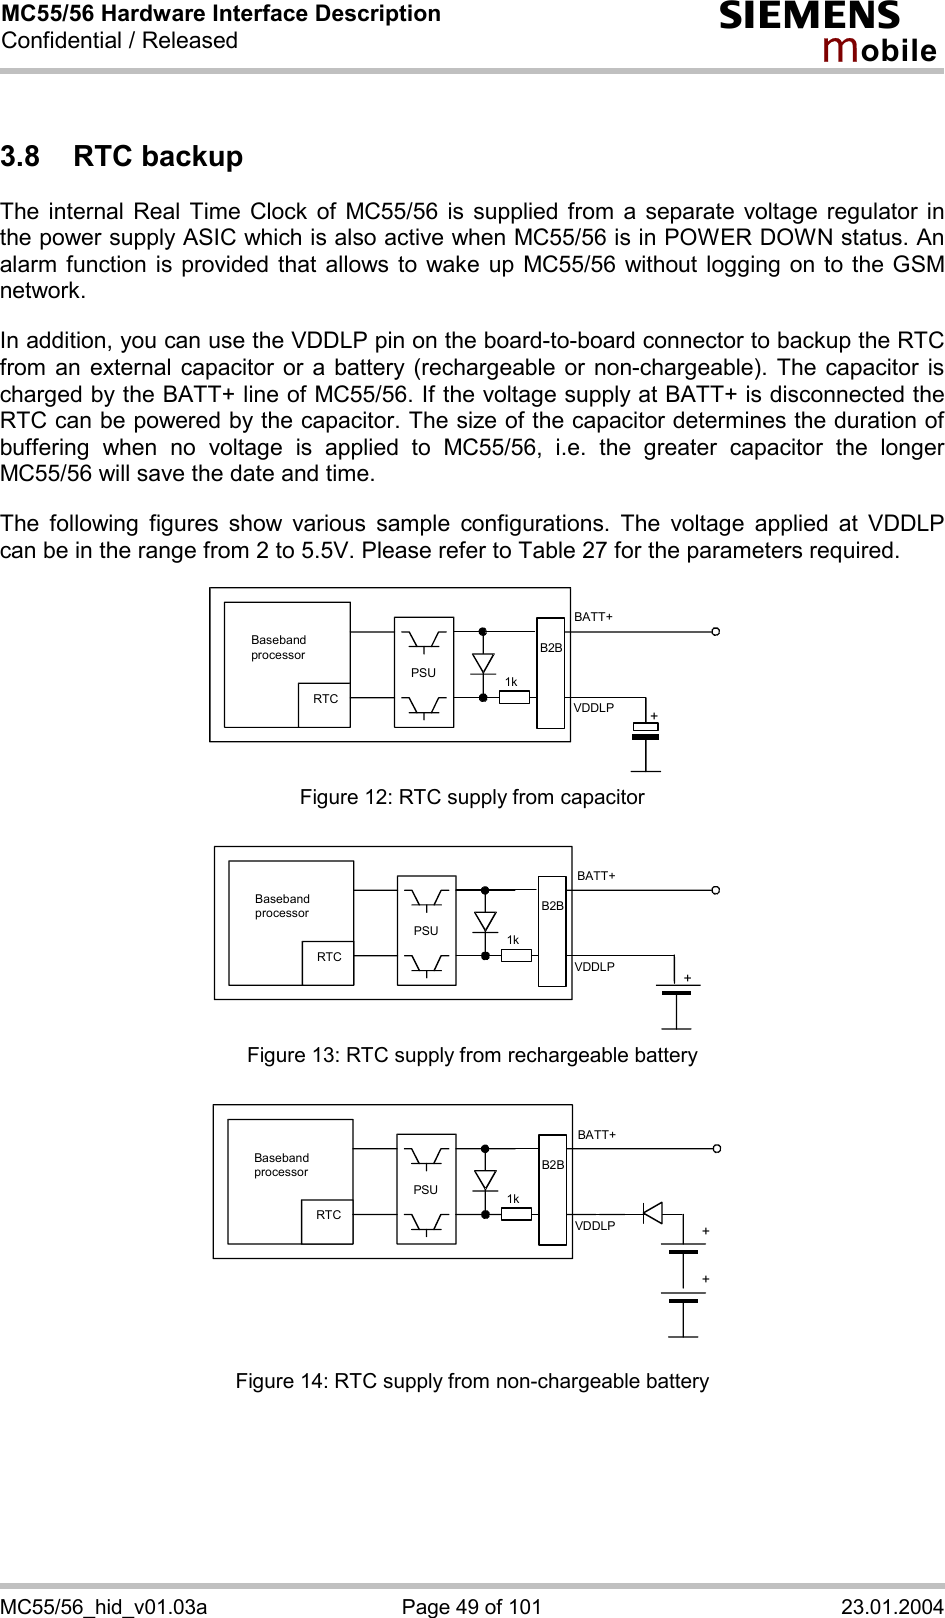 MC55/56 Hardware Interface Description Confidential / Released s mo b i l e MC55/56_hid_v01.03a  Page 49 of 101  23.01.2004 3.8 RTC backup The internal Real Time Clock of MC55/56 is supplied from a separate voltage regulator in the power supply ASIC which is also active when MC55/56 is in POWER DOWN status. An alarm function is provided that allows to wake up MC55/56 without logging on to the GSM network.   In addition, you can use the VDDLP pin on the board-to-board connector to backup the RTC from an external capacitor or a battery (rechargeable or non-chargeable). The capacitor is charged by the BATT+ line of MC55/56. If the voltage supply at BATT+ is disconnected the RTC can be powered by the capacitor. The size of the capacitor determines the duration of buffering when no voltage is applied to MC55/56, i.e. the greater capacitor the longer MC55/56 will save the date and time.   The following figures show various sample configurations. The voltage applied at VDDLP can be in the range from 2 to 5.5V. Please refer to Table 27 for the parameters required.    Baseband processor RTC PSU+BATT+ 1kB2BVDDLP Figure 12: RTC supply from capacitor   RTC PSU+BATT+ 1kB2BVDDLPBaseband processor  Figure 13: RTC supply from rechargeable battery   RTC PSU++BATT+ 1kVDDLPB2BBaseband processor  Figure 14: RTC supply from non-chargeable battery 